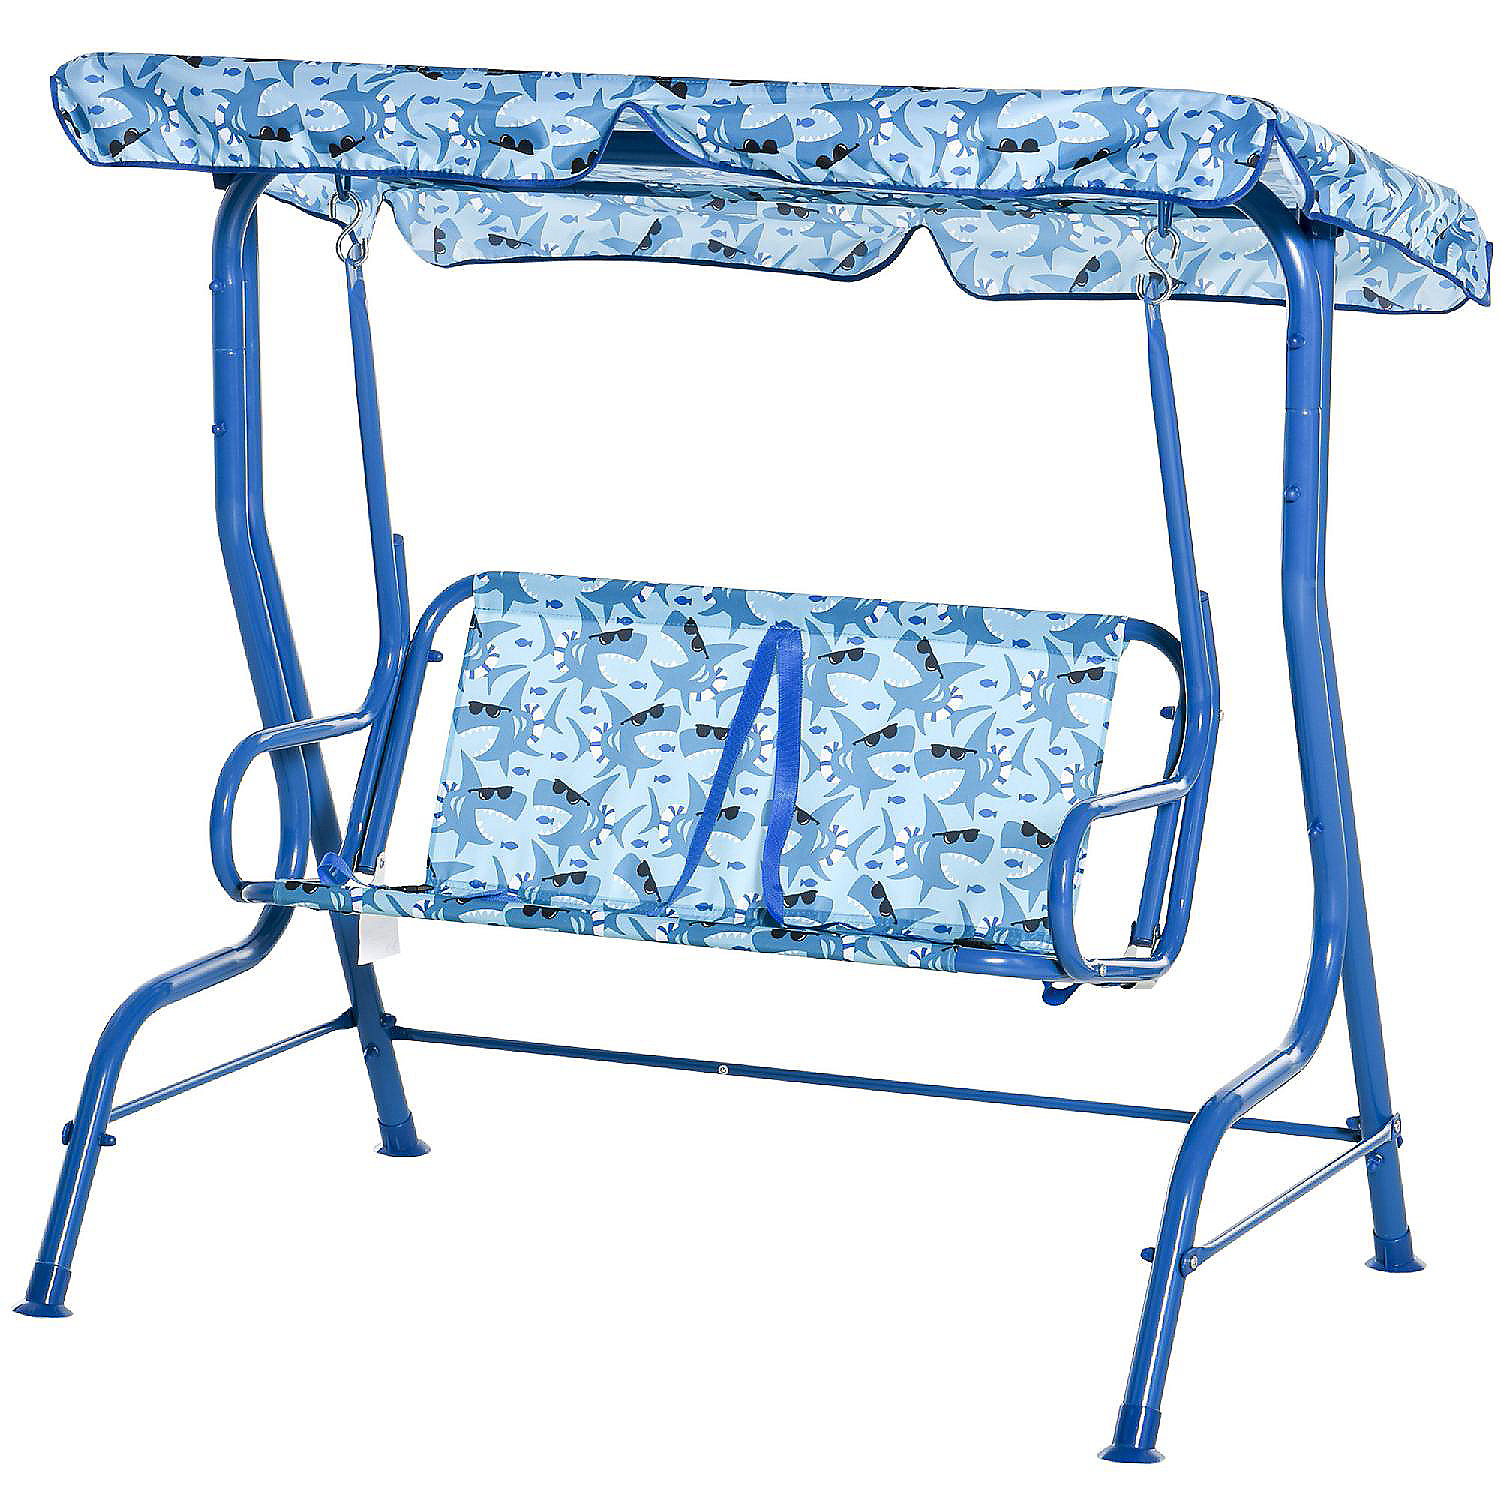 Details about   Outsunny 2-Seat Kid Canopy Swing Chair Seat Belt Awning 43.25" x 27.5" x 43.25" 